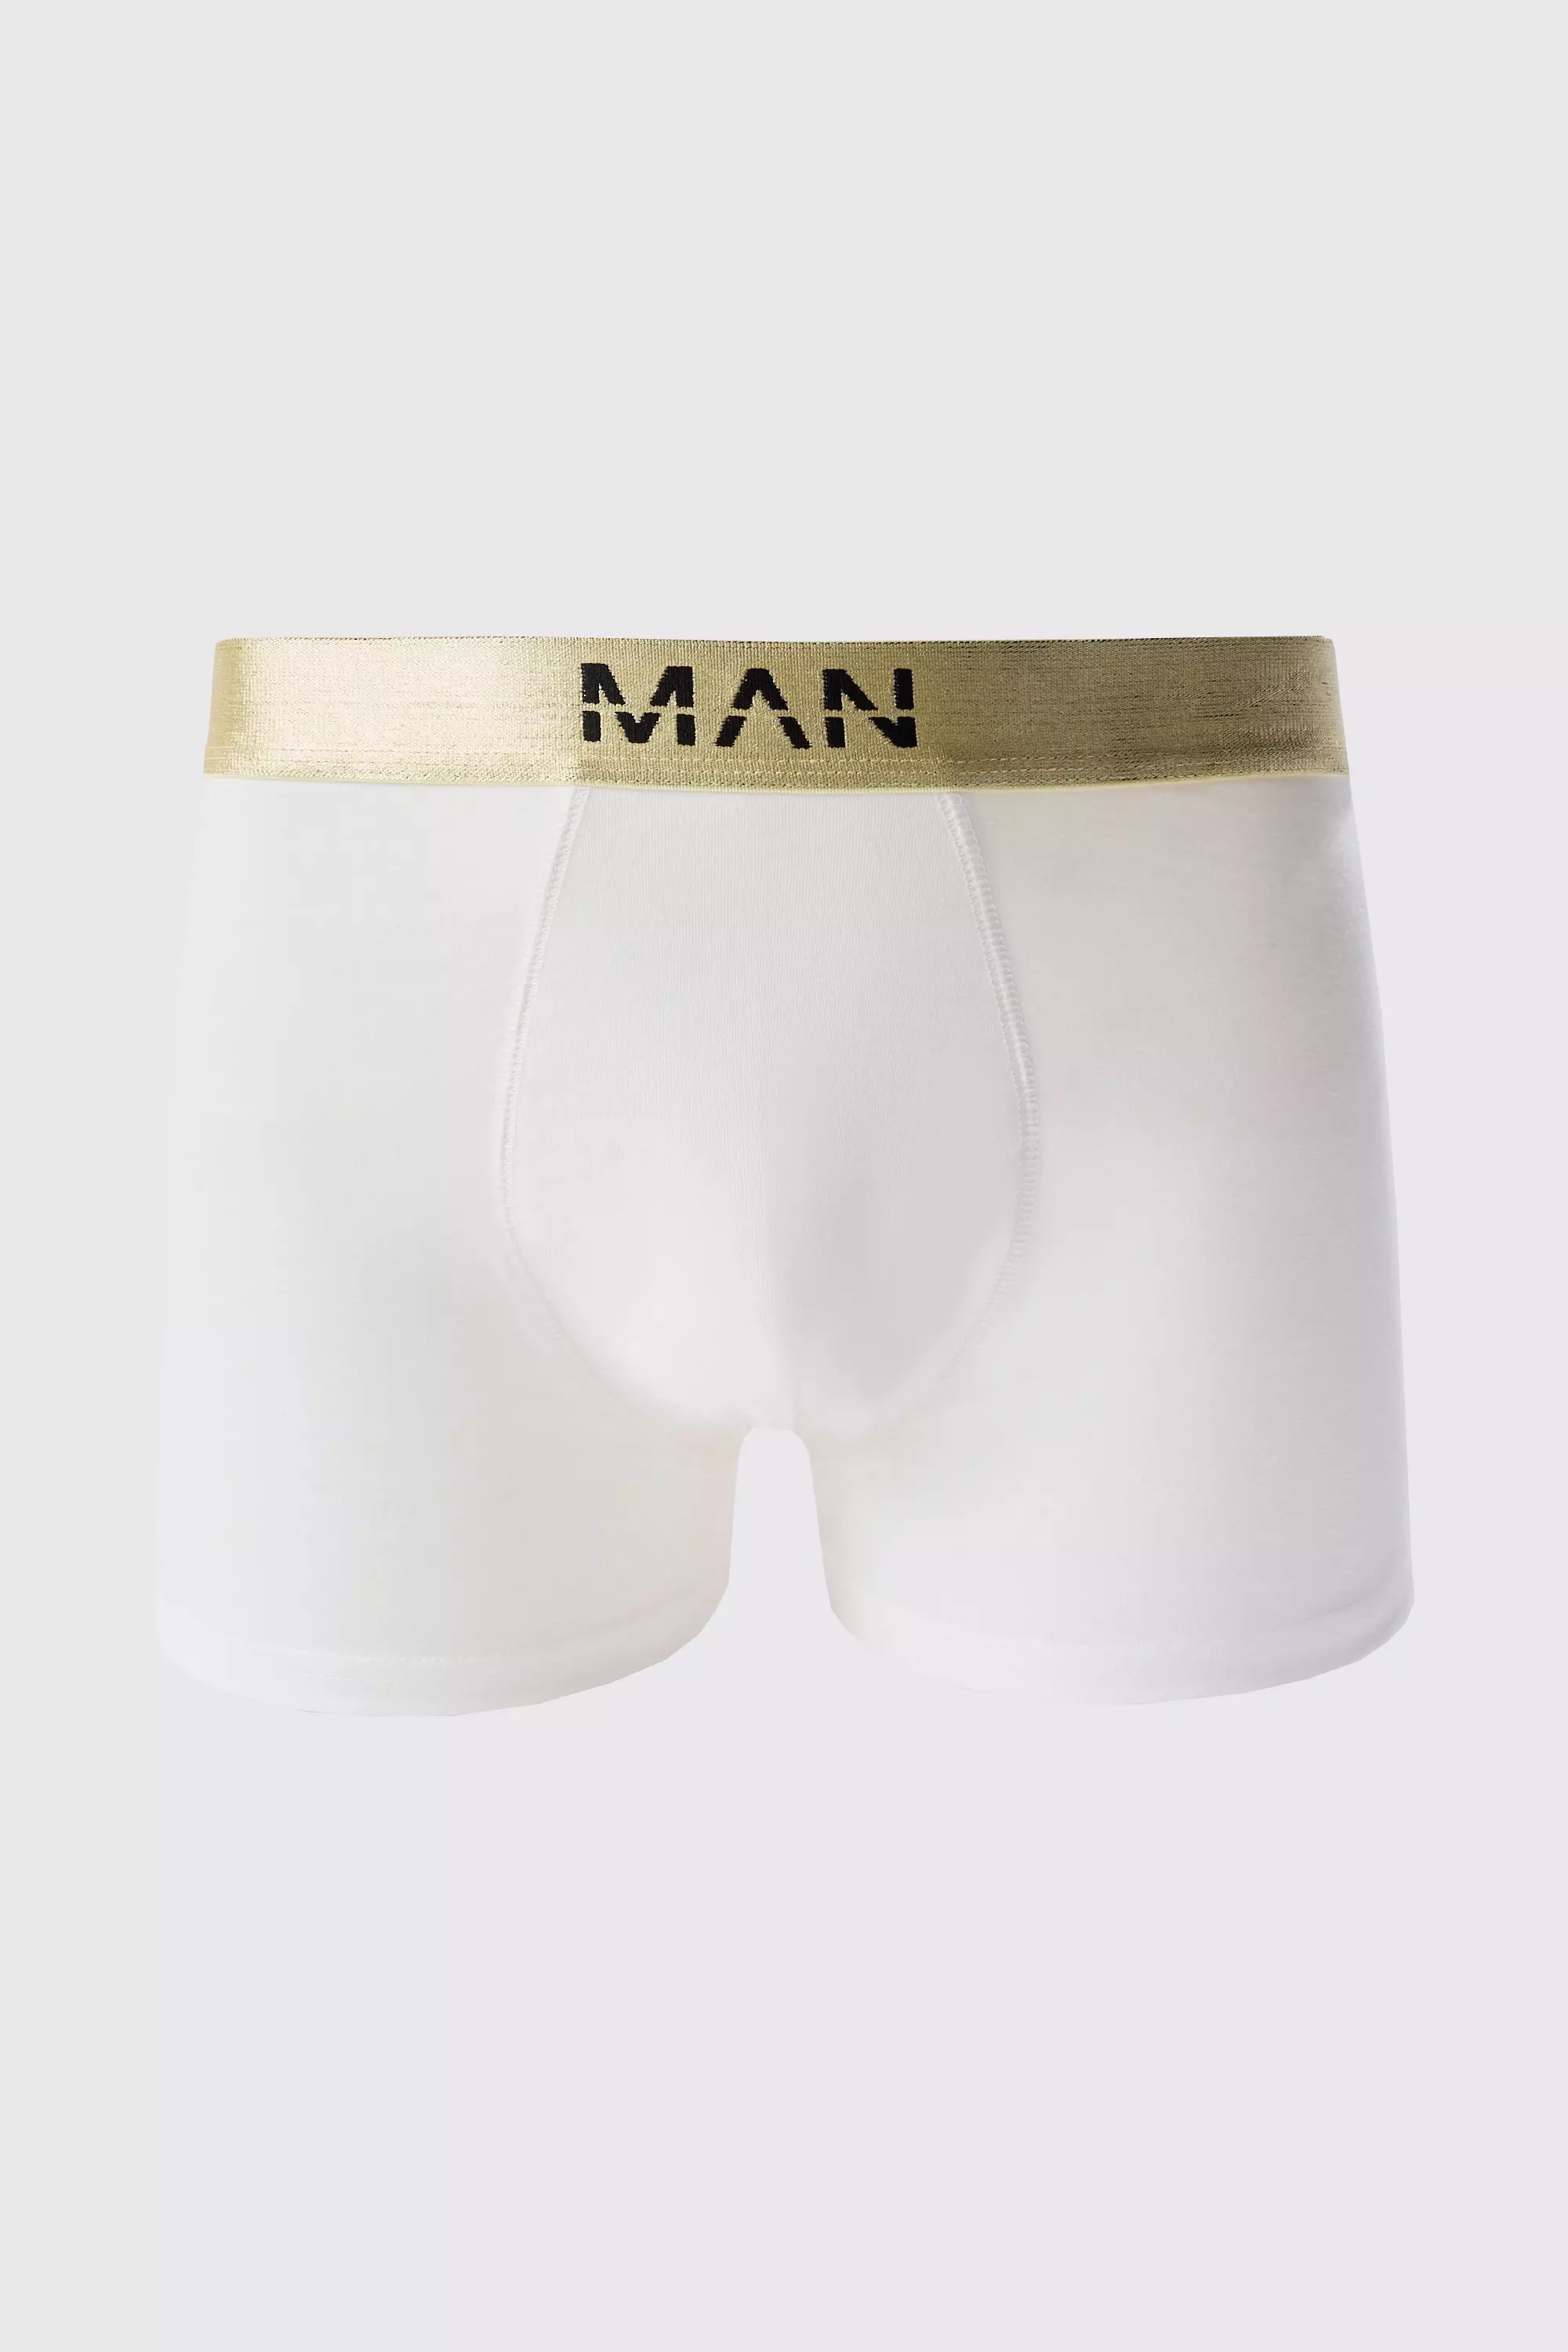 Multi 3 Pack Man Dash Gold Waistband Boxers In Multi